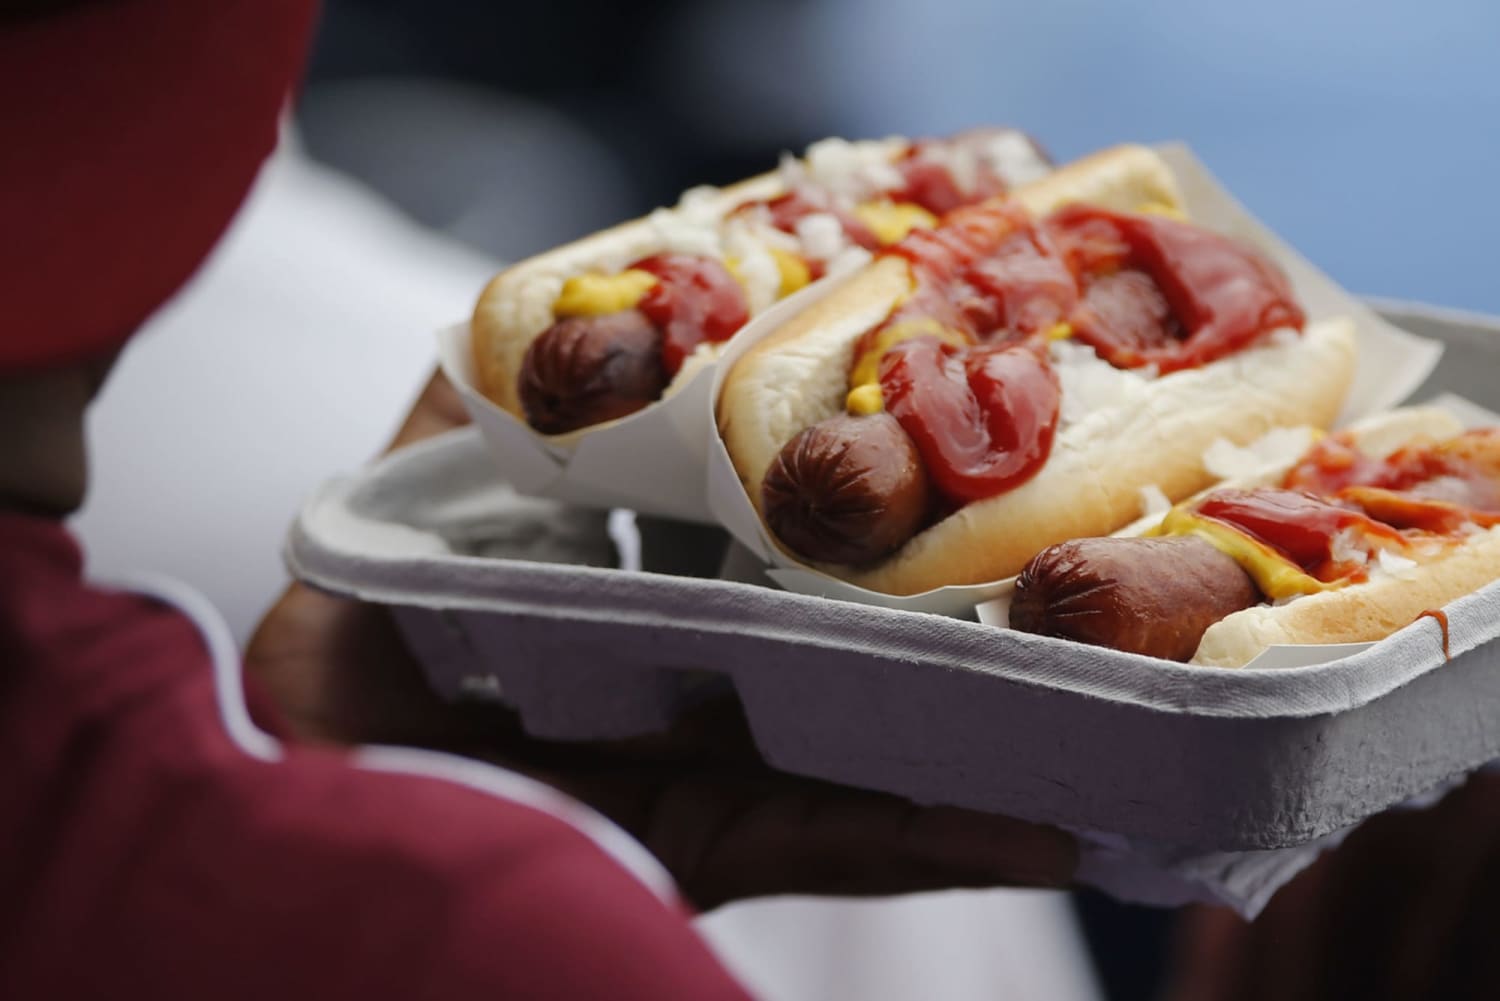 The most popular hot dog order is far from a traditional hot dog